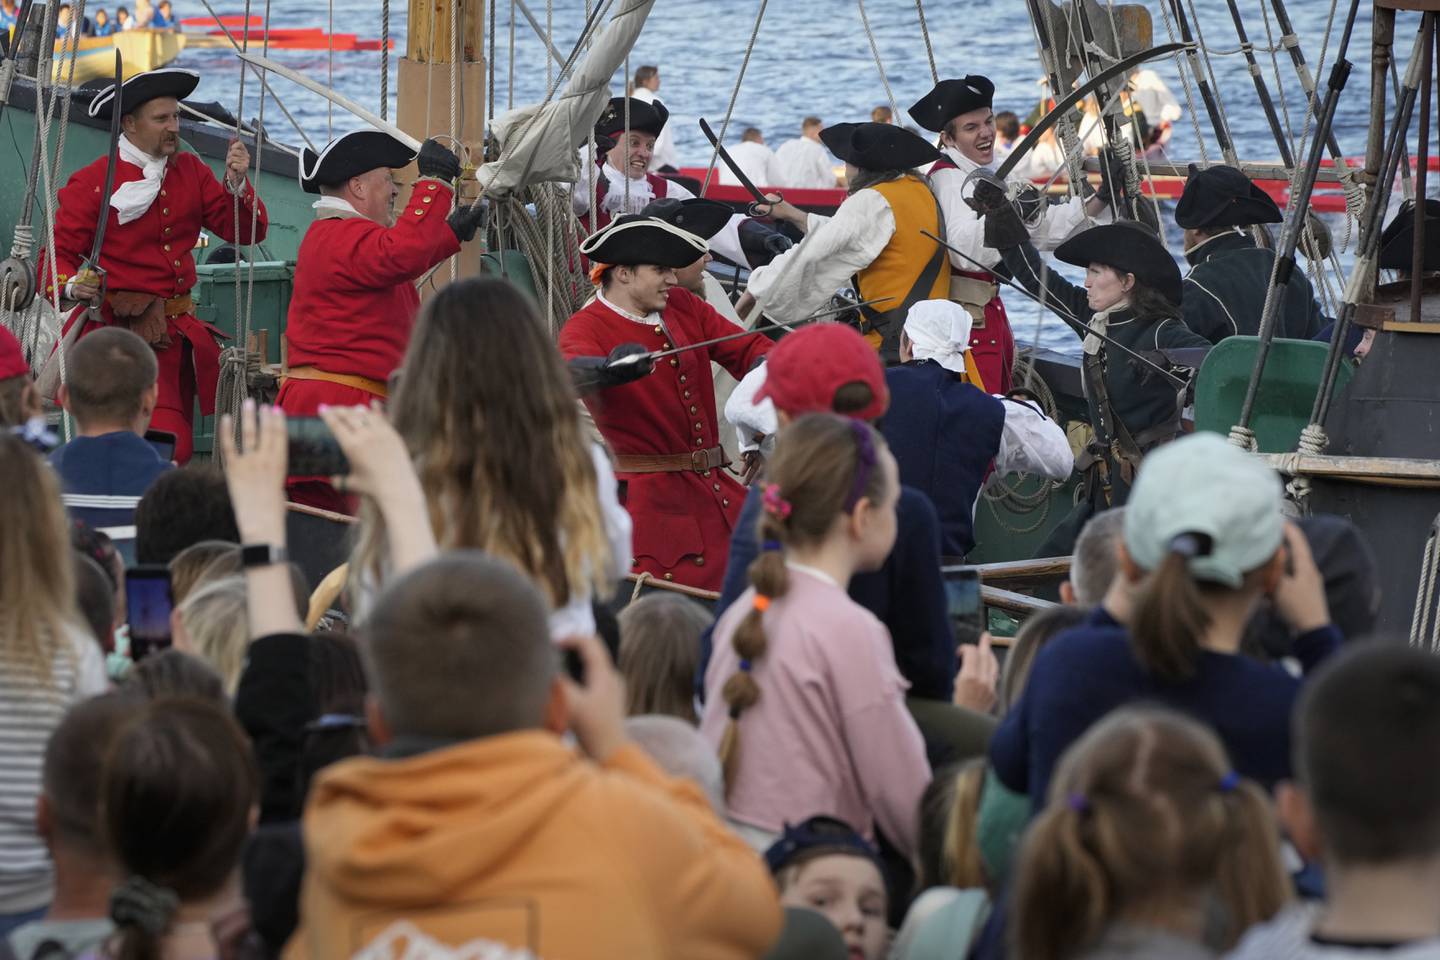 People watch a reconstruction of a battle between Russian and Sweden sailors during festivities marking the 350th birthday of Russian Tsar Peter the Great in St. Petersburg. AP